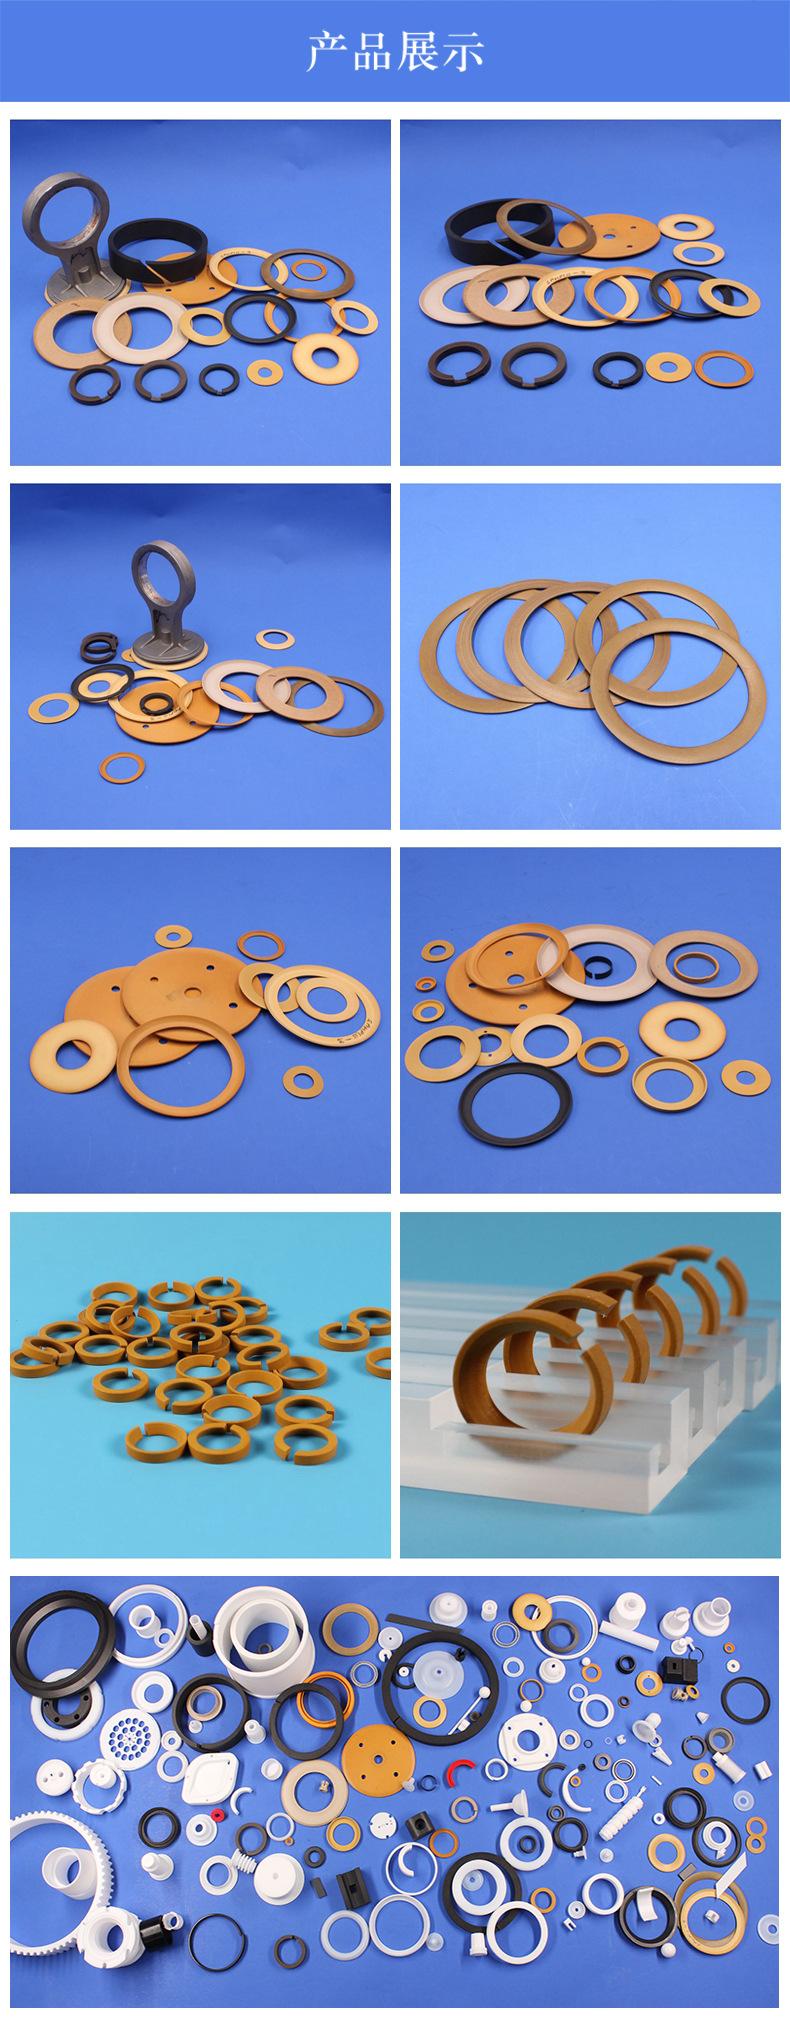 Dechuang injection molding processing various PI parts, polyimide fluoroplastic products, processing according to drawings and samples